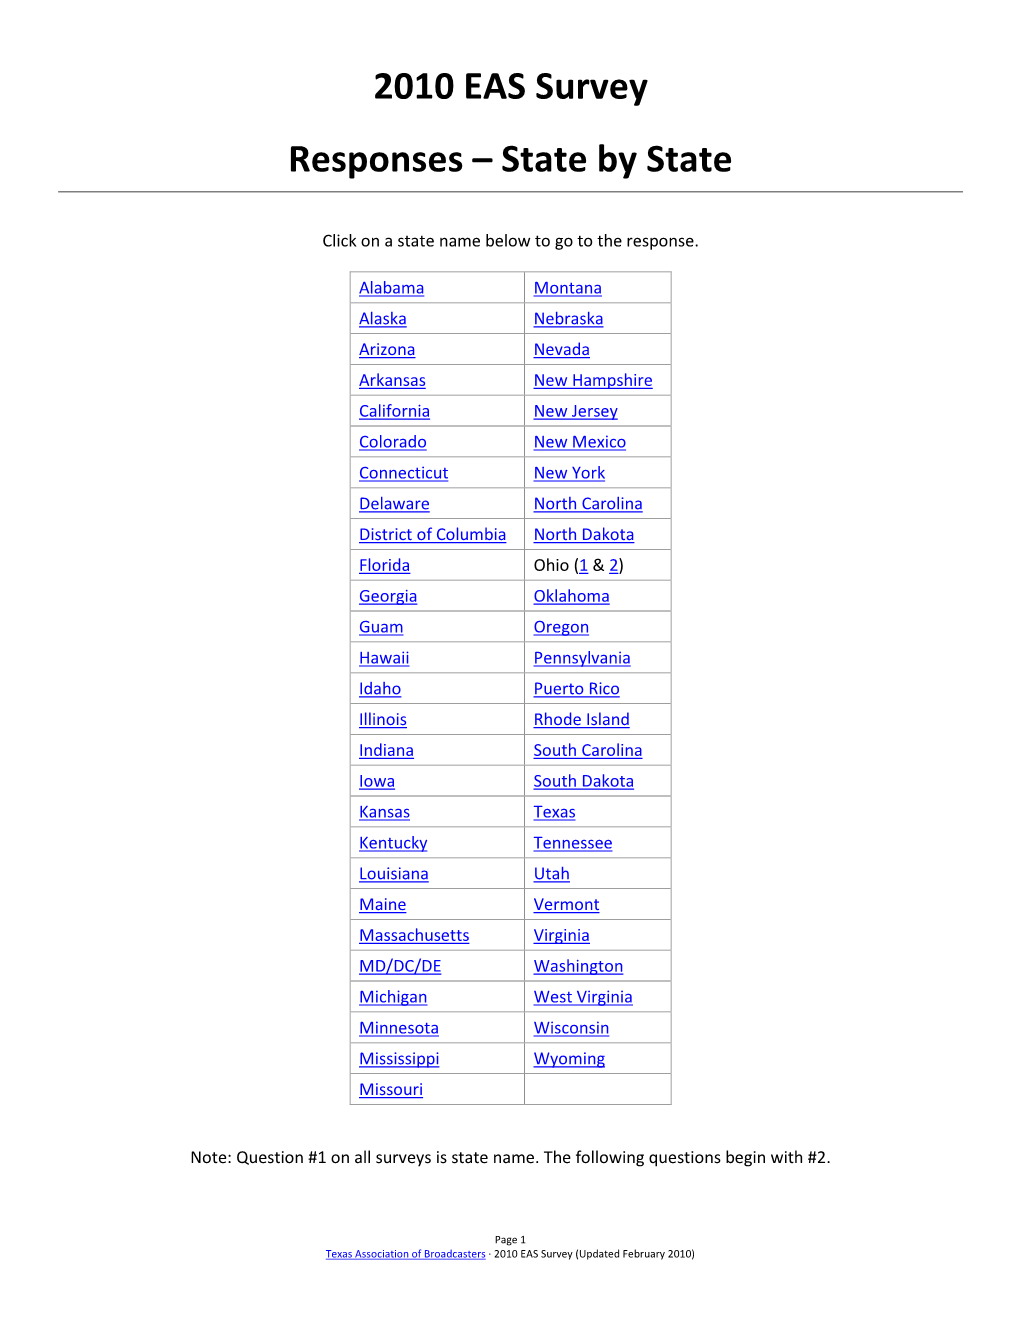 2010 EAS Survey Responses – State by State